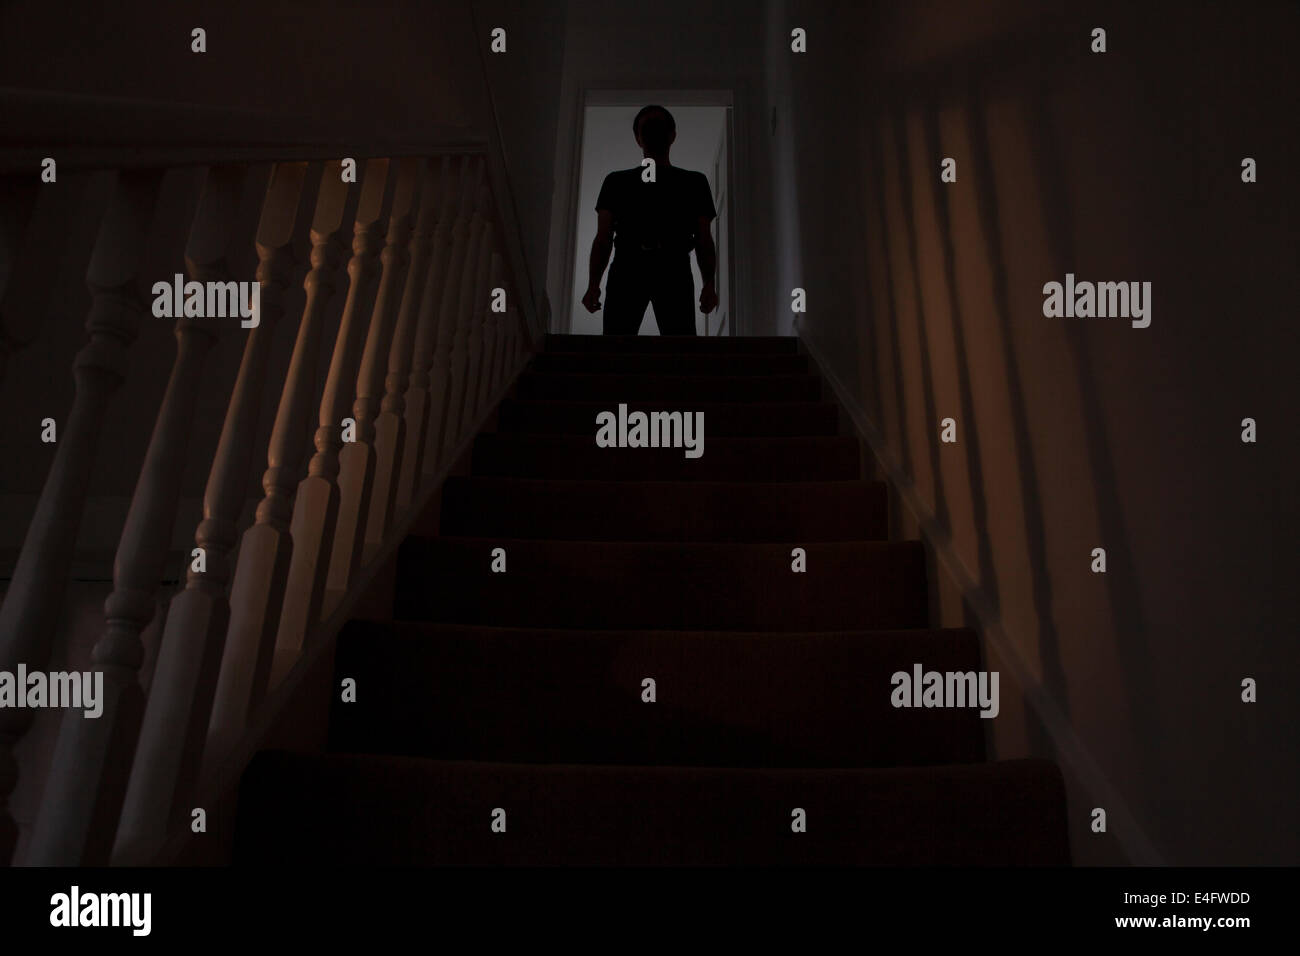 Silhouette of a man standing at the top of a stairway, shadows cast on the walls from the light below. See similar images. Stock Photo